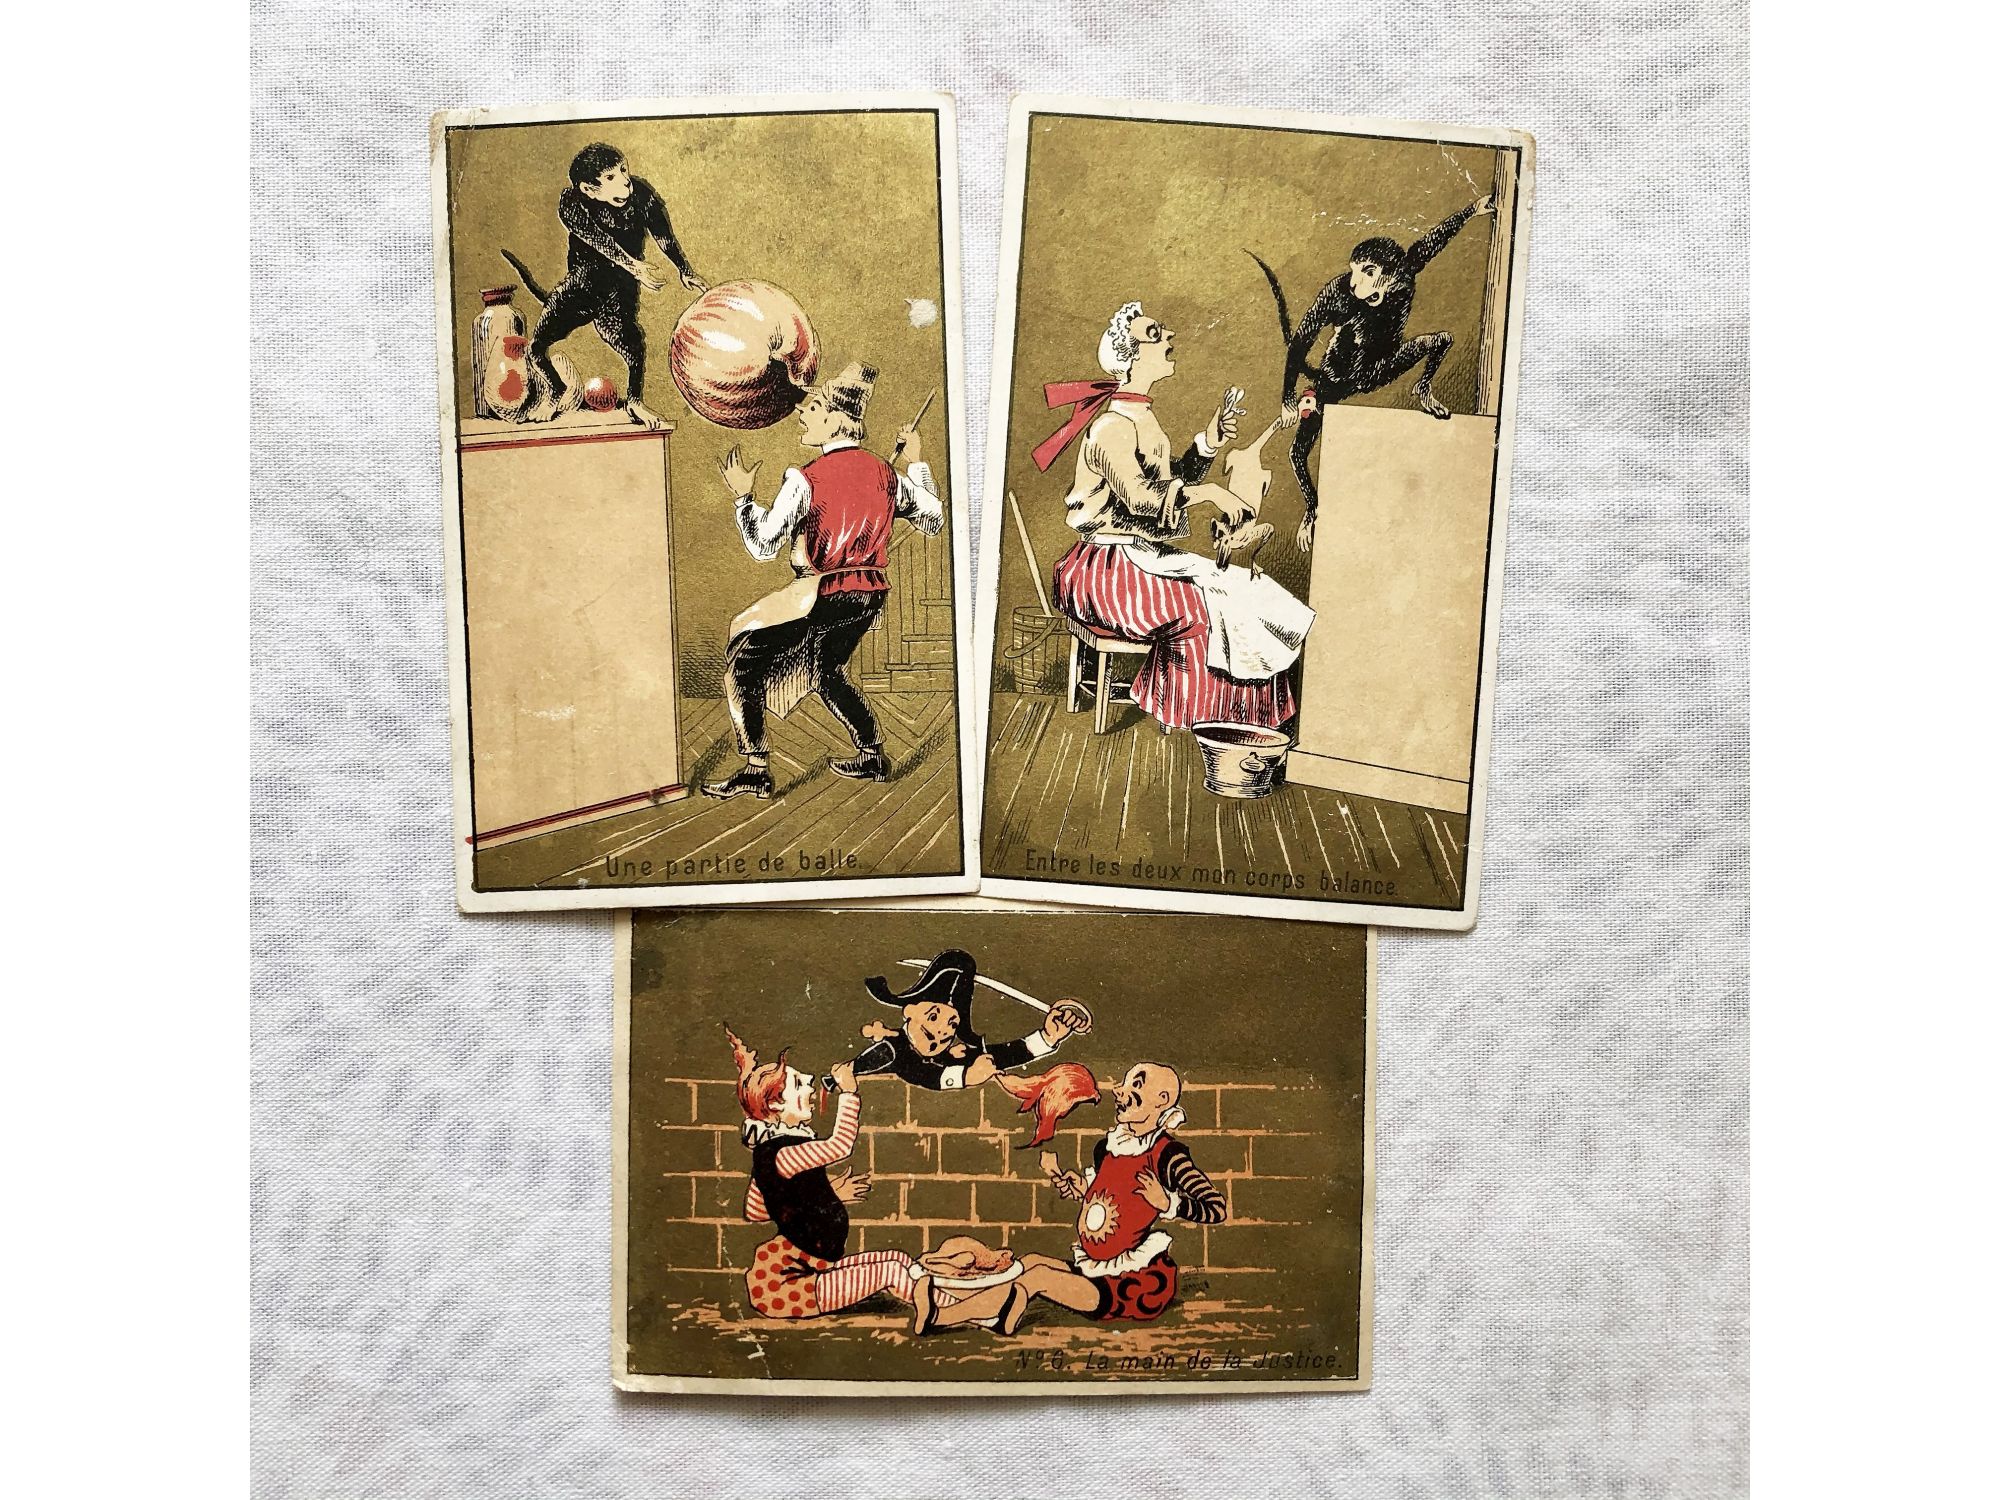 3 vintage French chromos representing small humorous scenes at the end of the 19th century